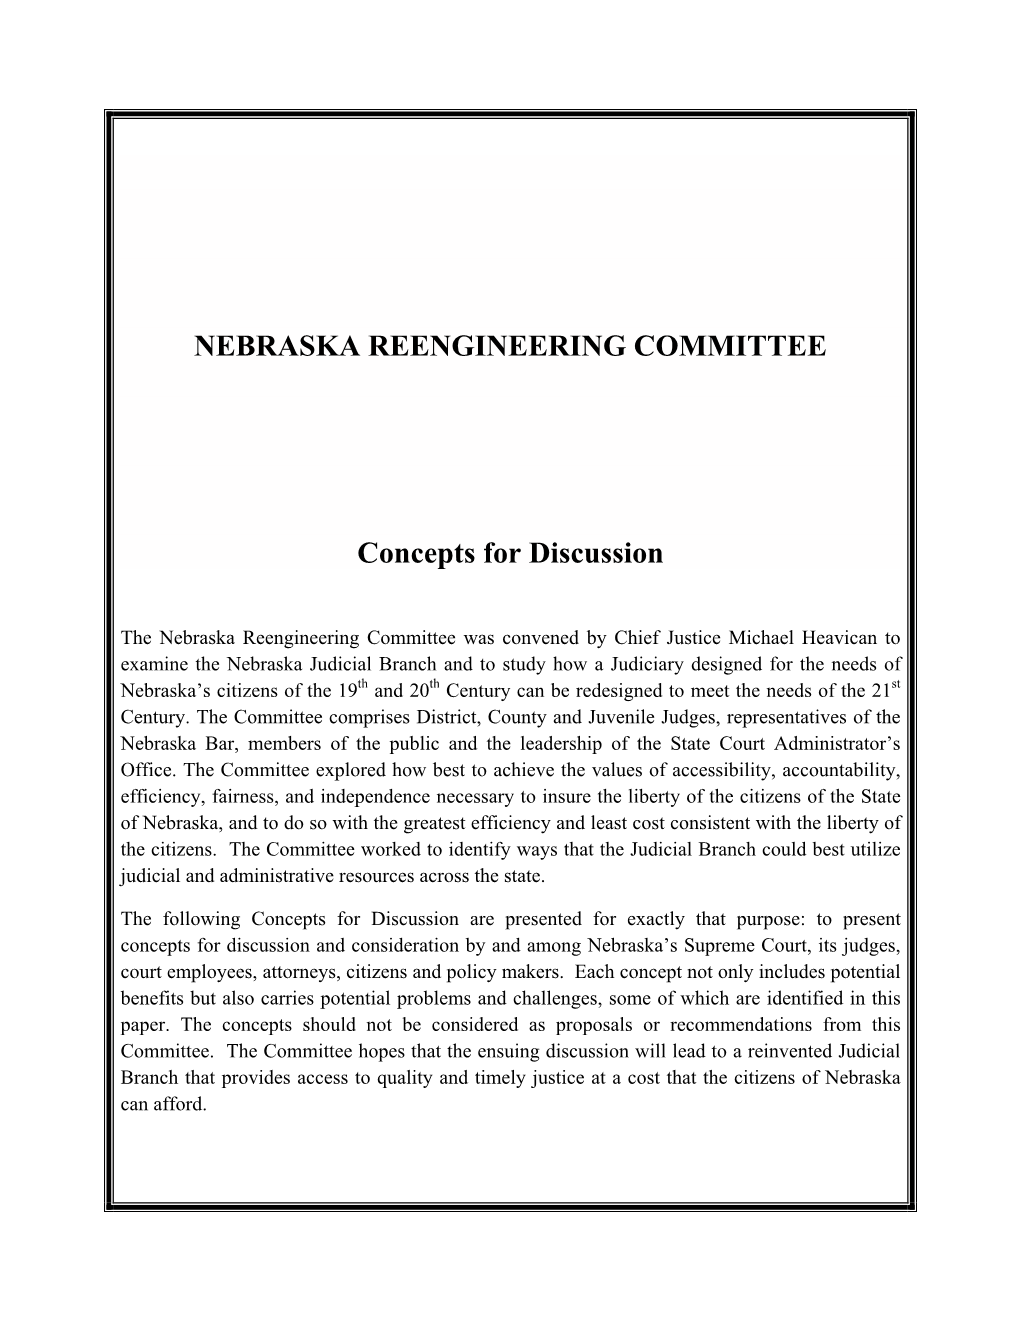 NEBRASKA REENGINEERING COMMITTEE Concepts for Discussion